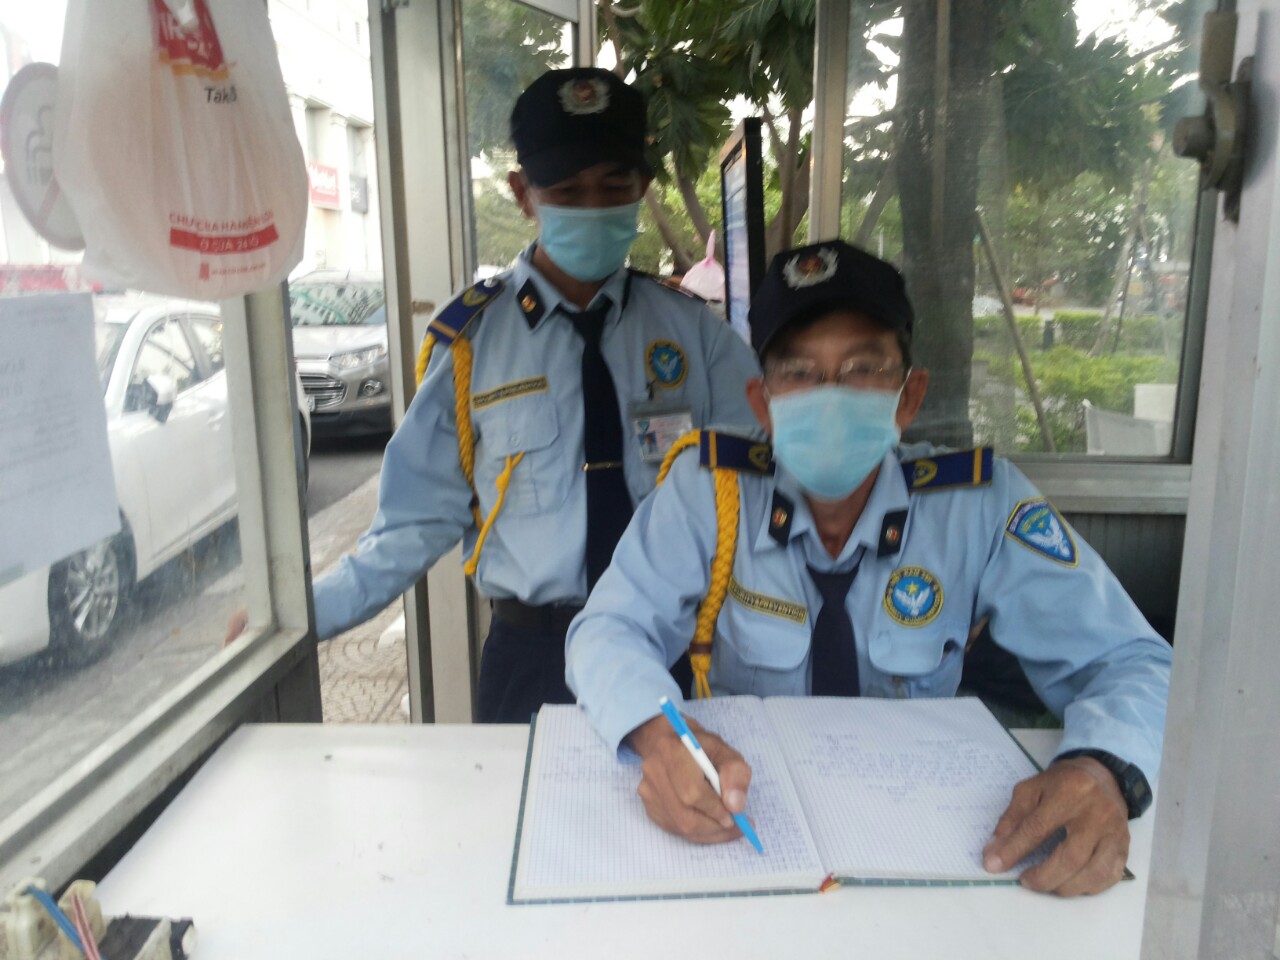 Building Security and communication of Guard Employee 5